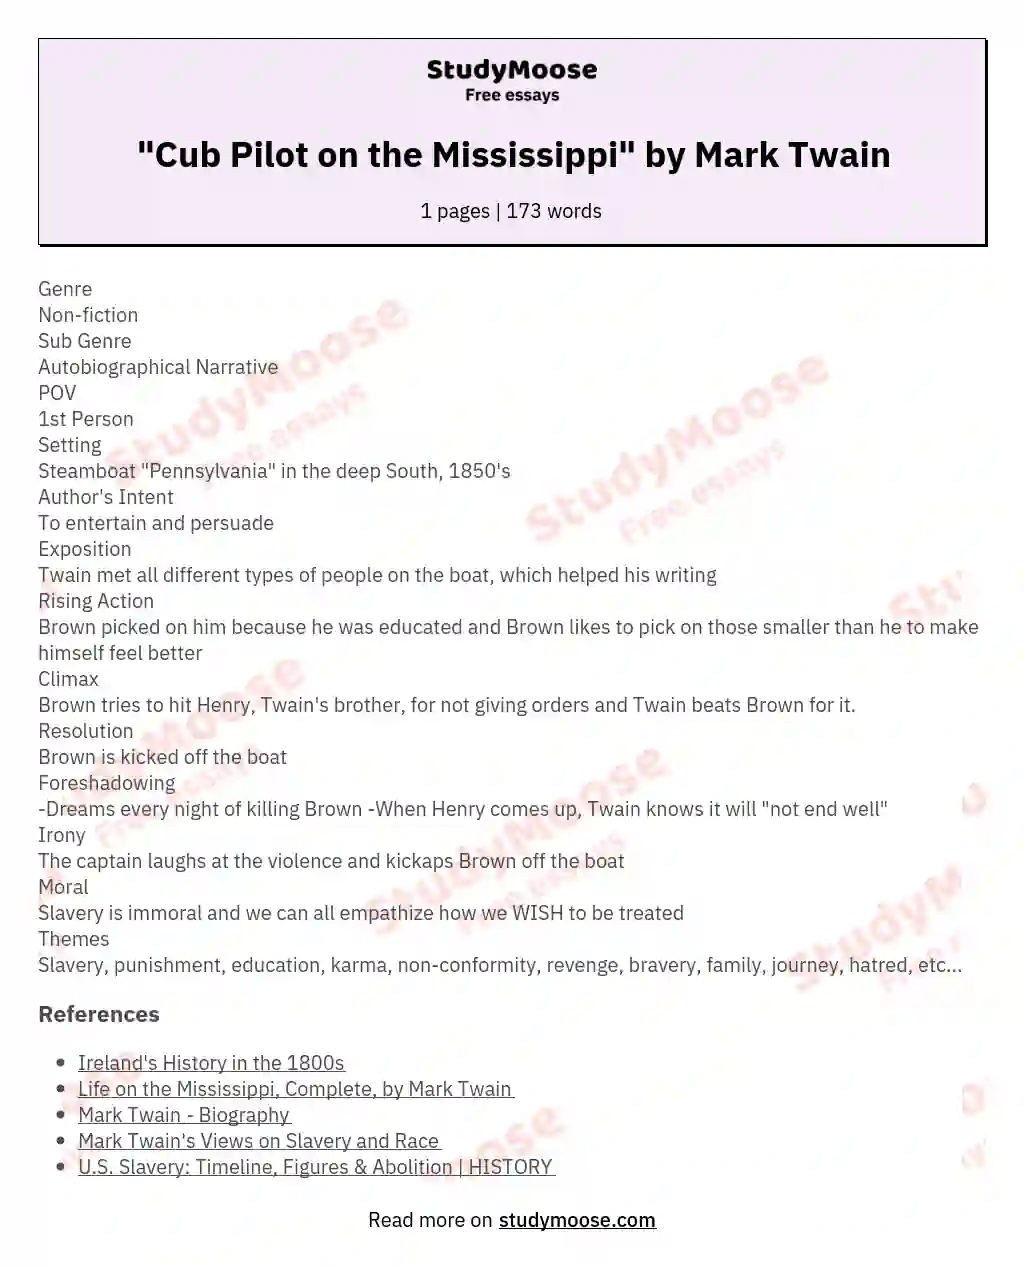 &quot;Cub Pilot on the Mississippi&quot; by Mark Twain